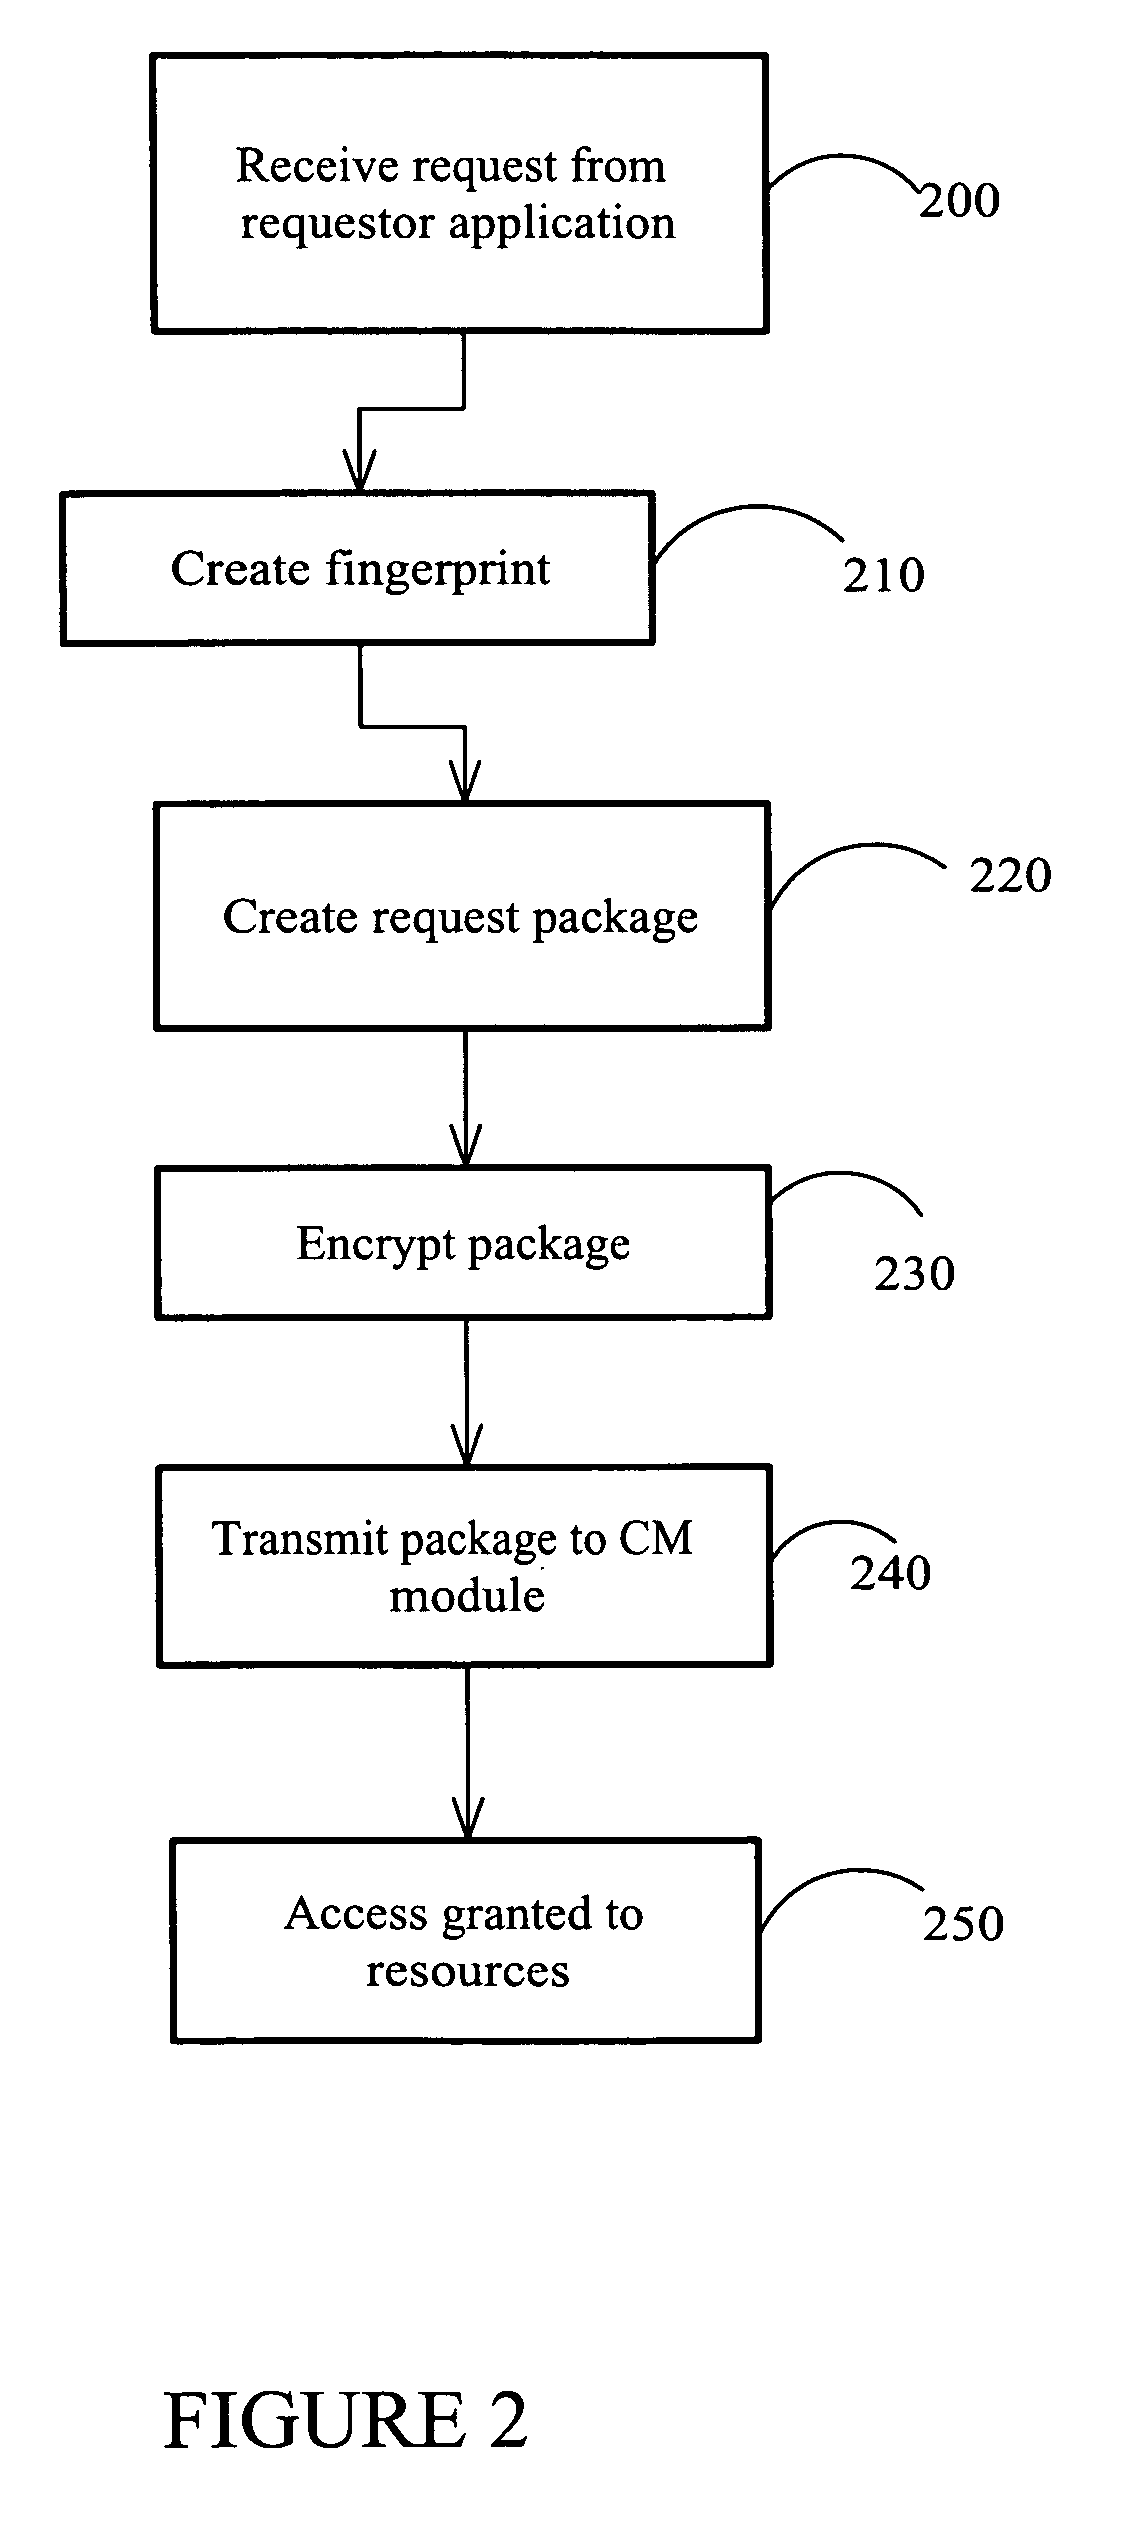 Simplified management of authentication credentials for unattended applications